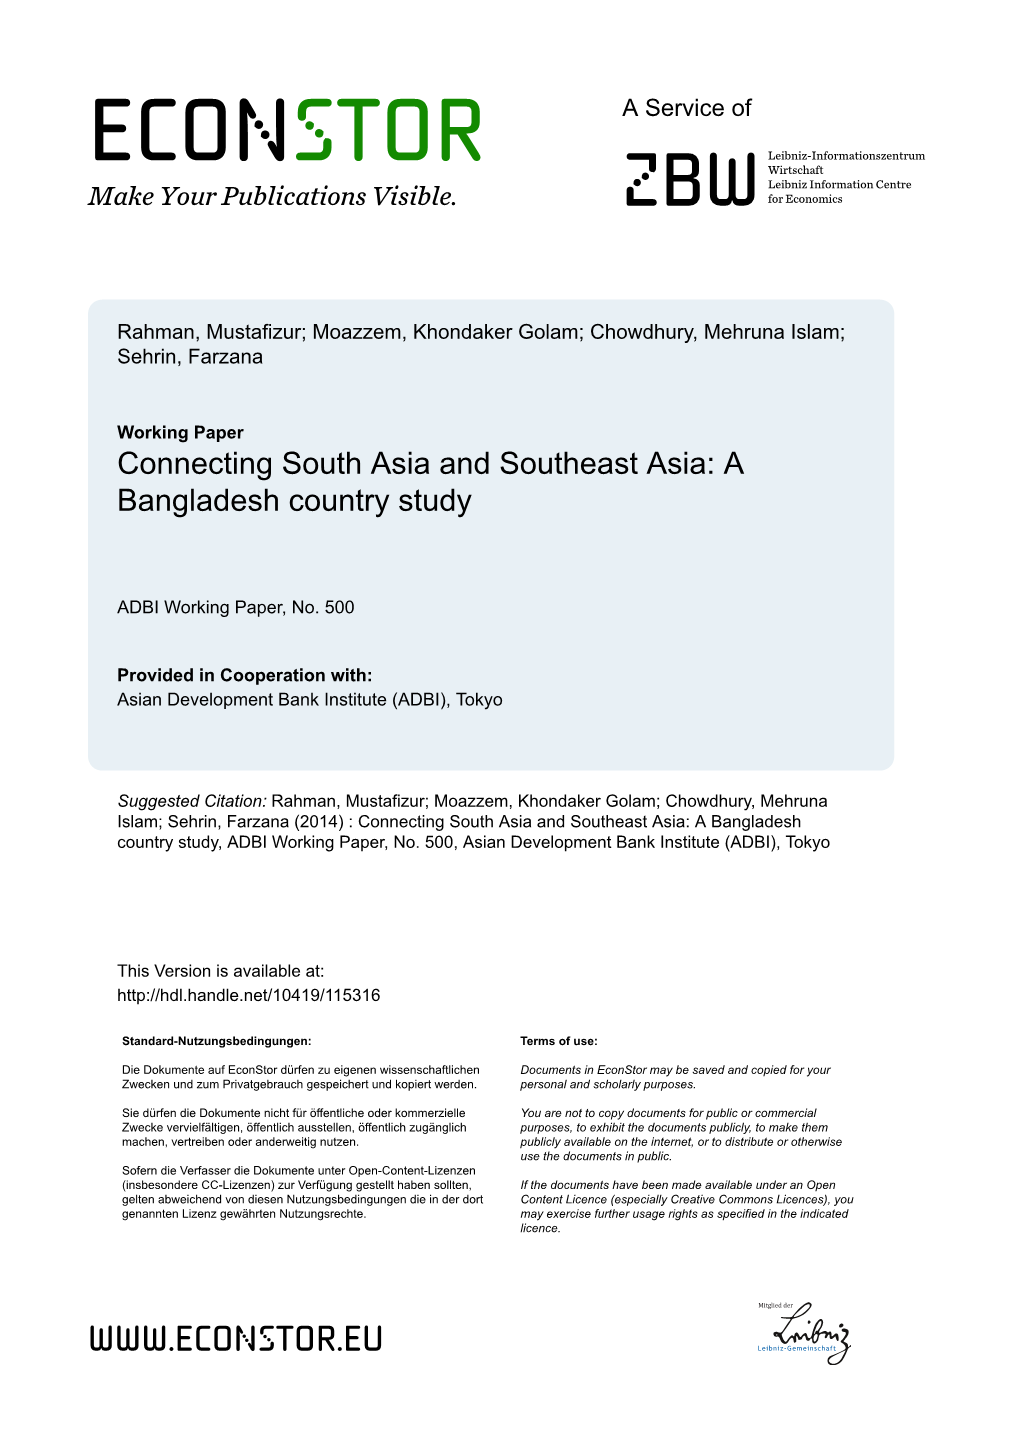 Connecting South Asia and Southeast Asia: a Bangladesh Country Study